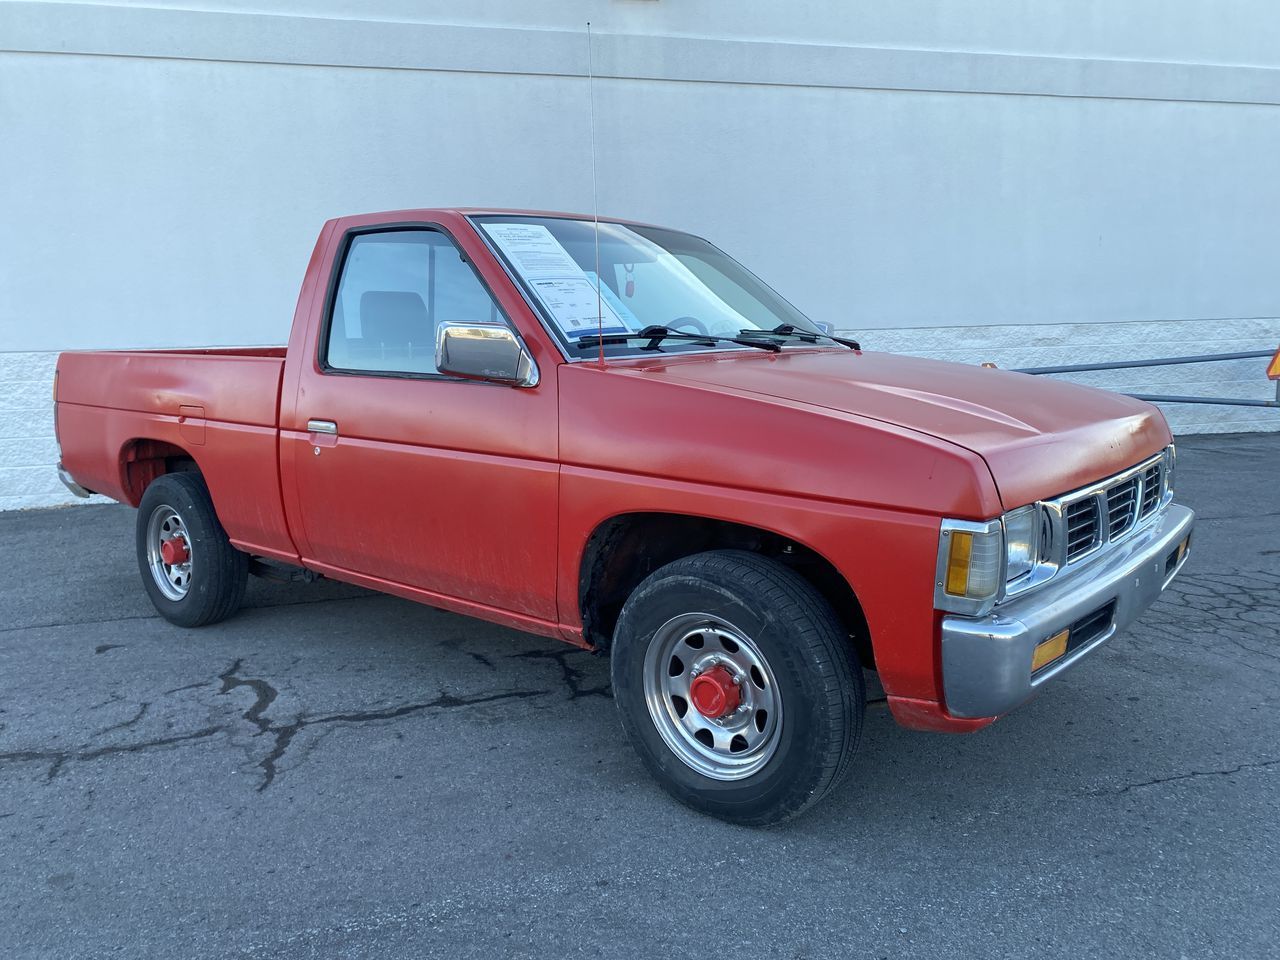 1991 Nissan Hardbody: The little pickup truck that can do it all.